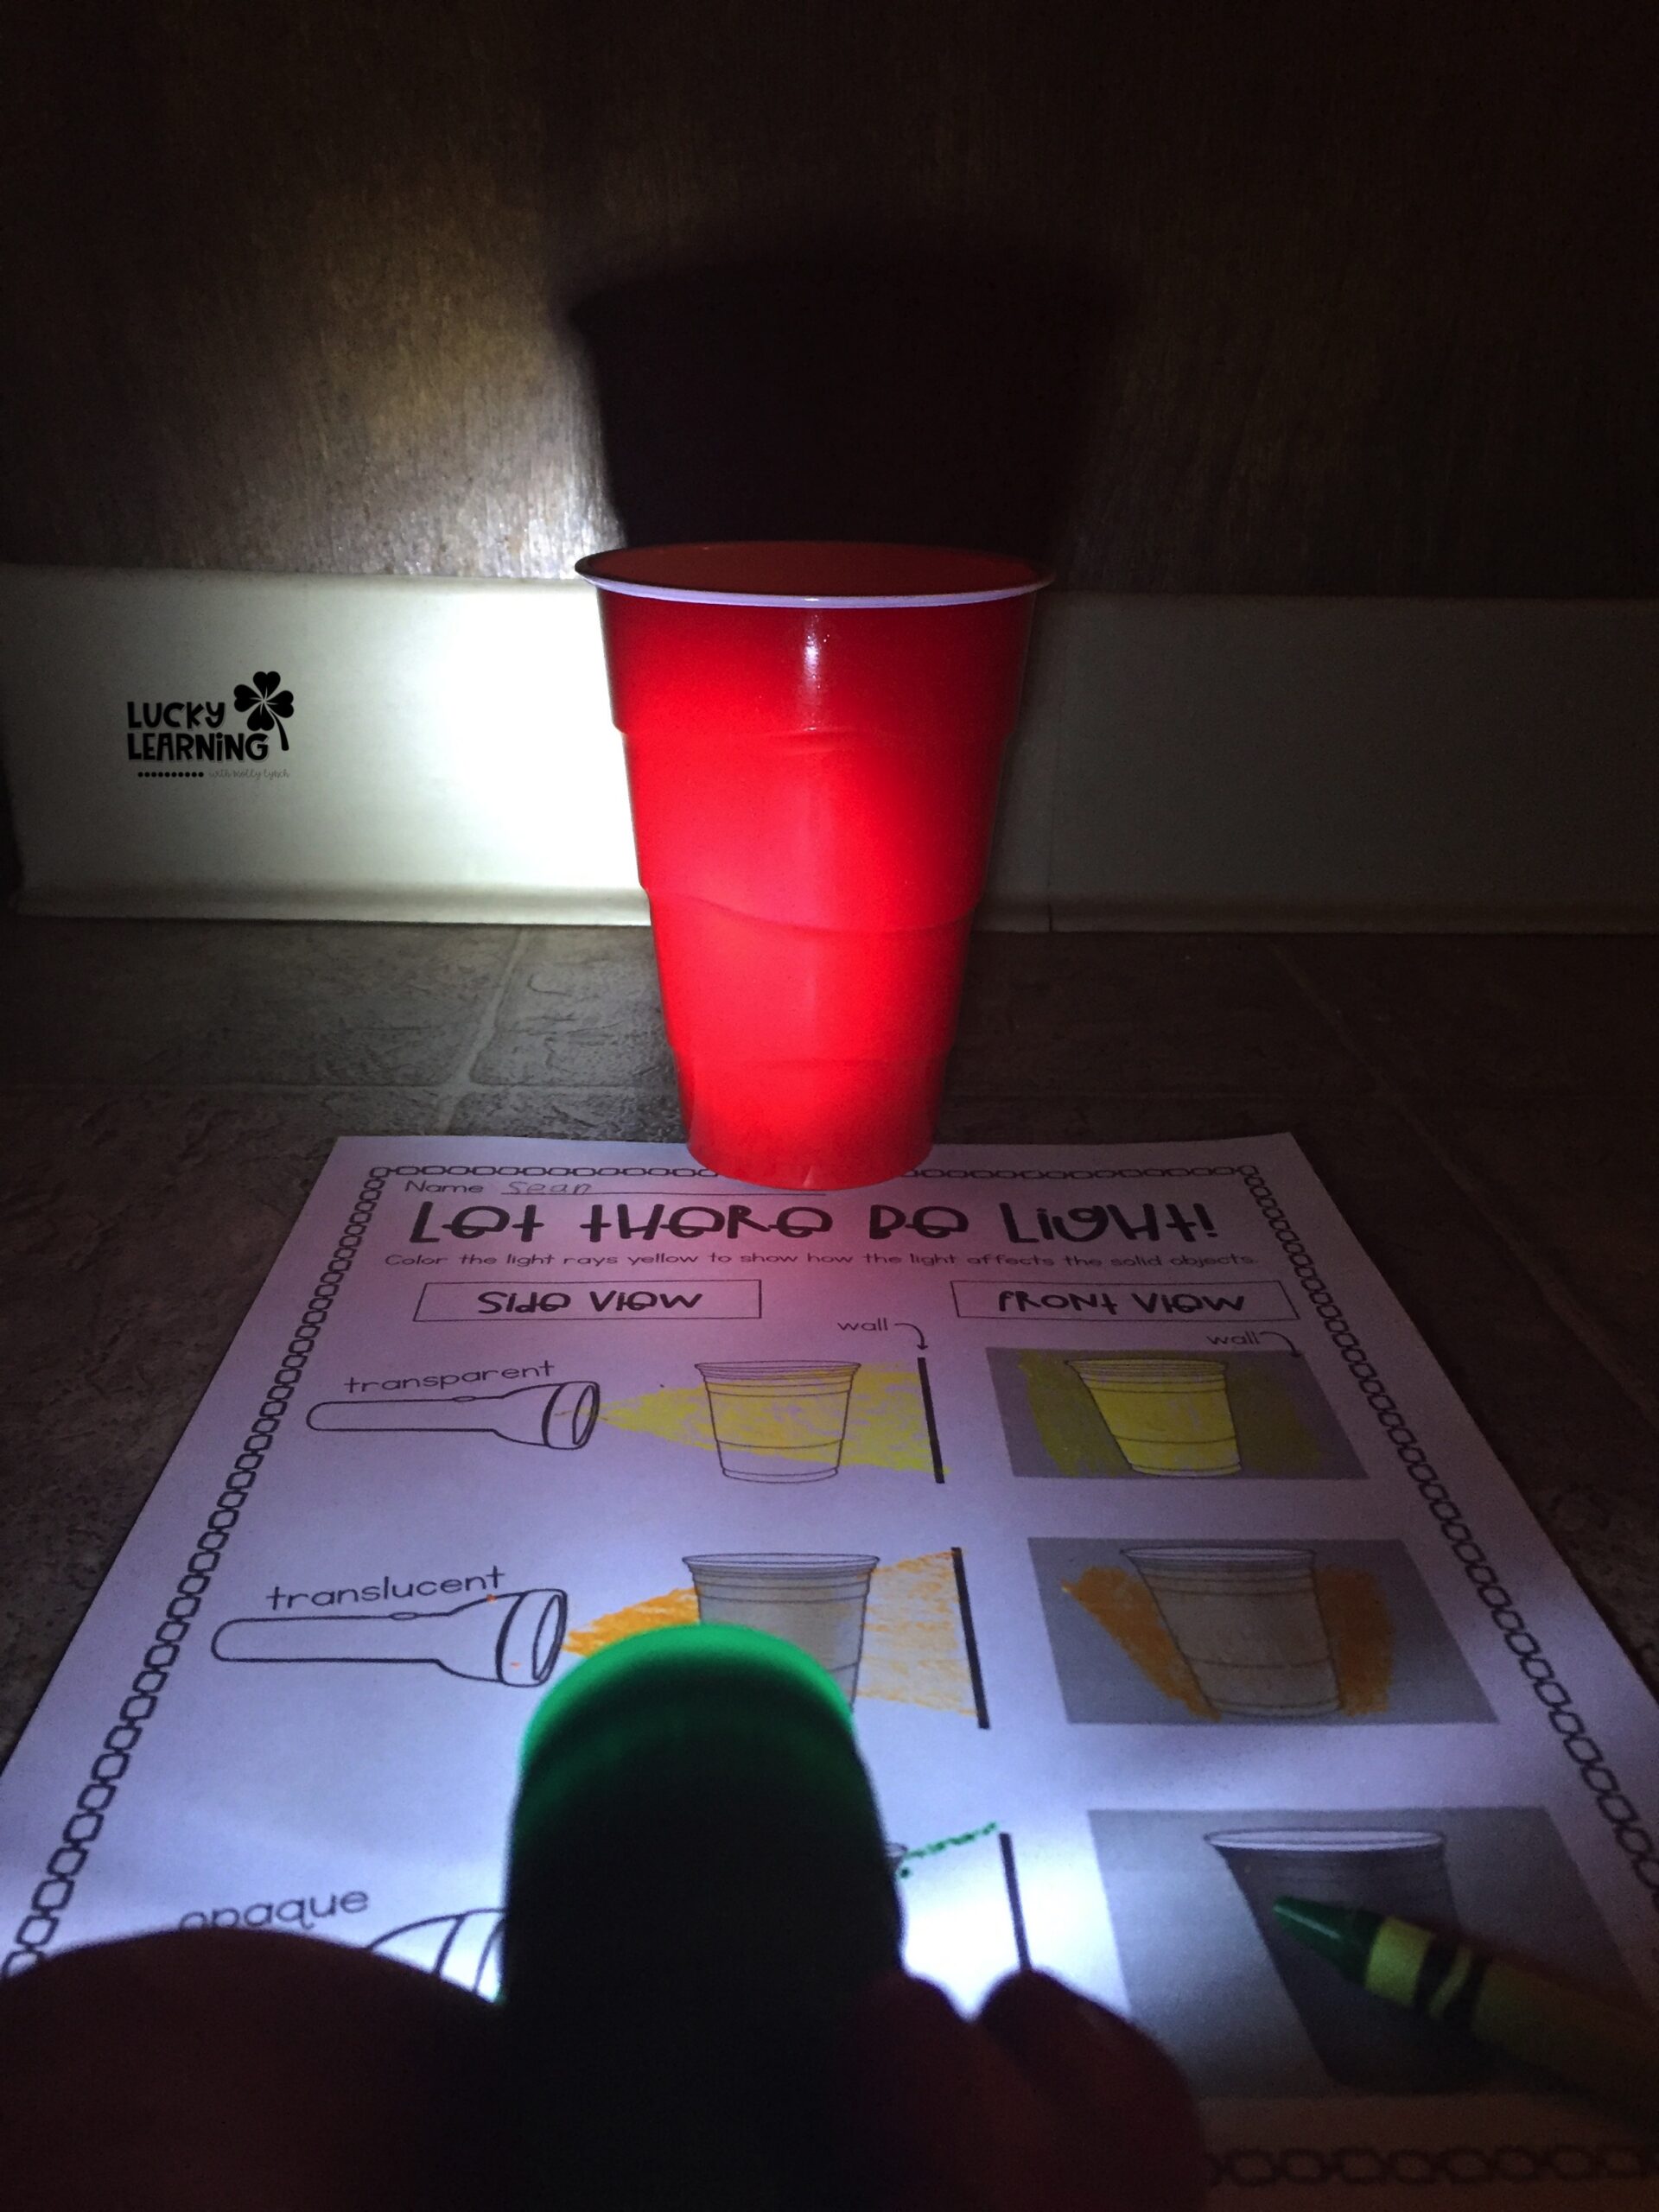 This article offers a practical guide for educators and parents looking to introduce young children to science through interactive and entertaining experiments. The experiments mentioned align with NGSS, targeting students from kindergarten to second grade, fostering curiosity, and making science a fun learning experience.